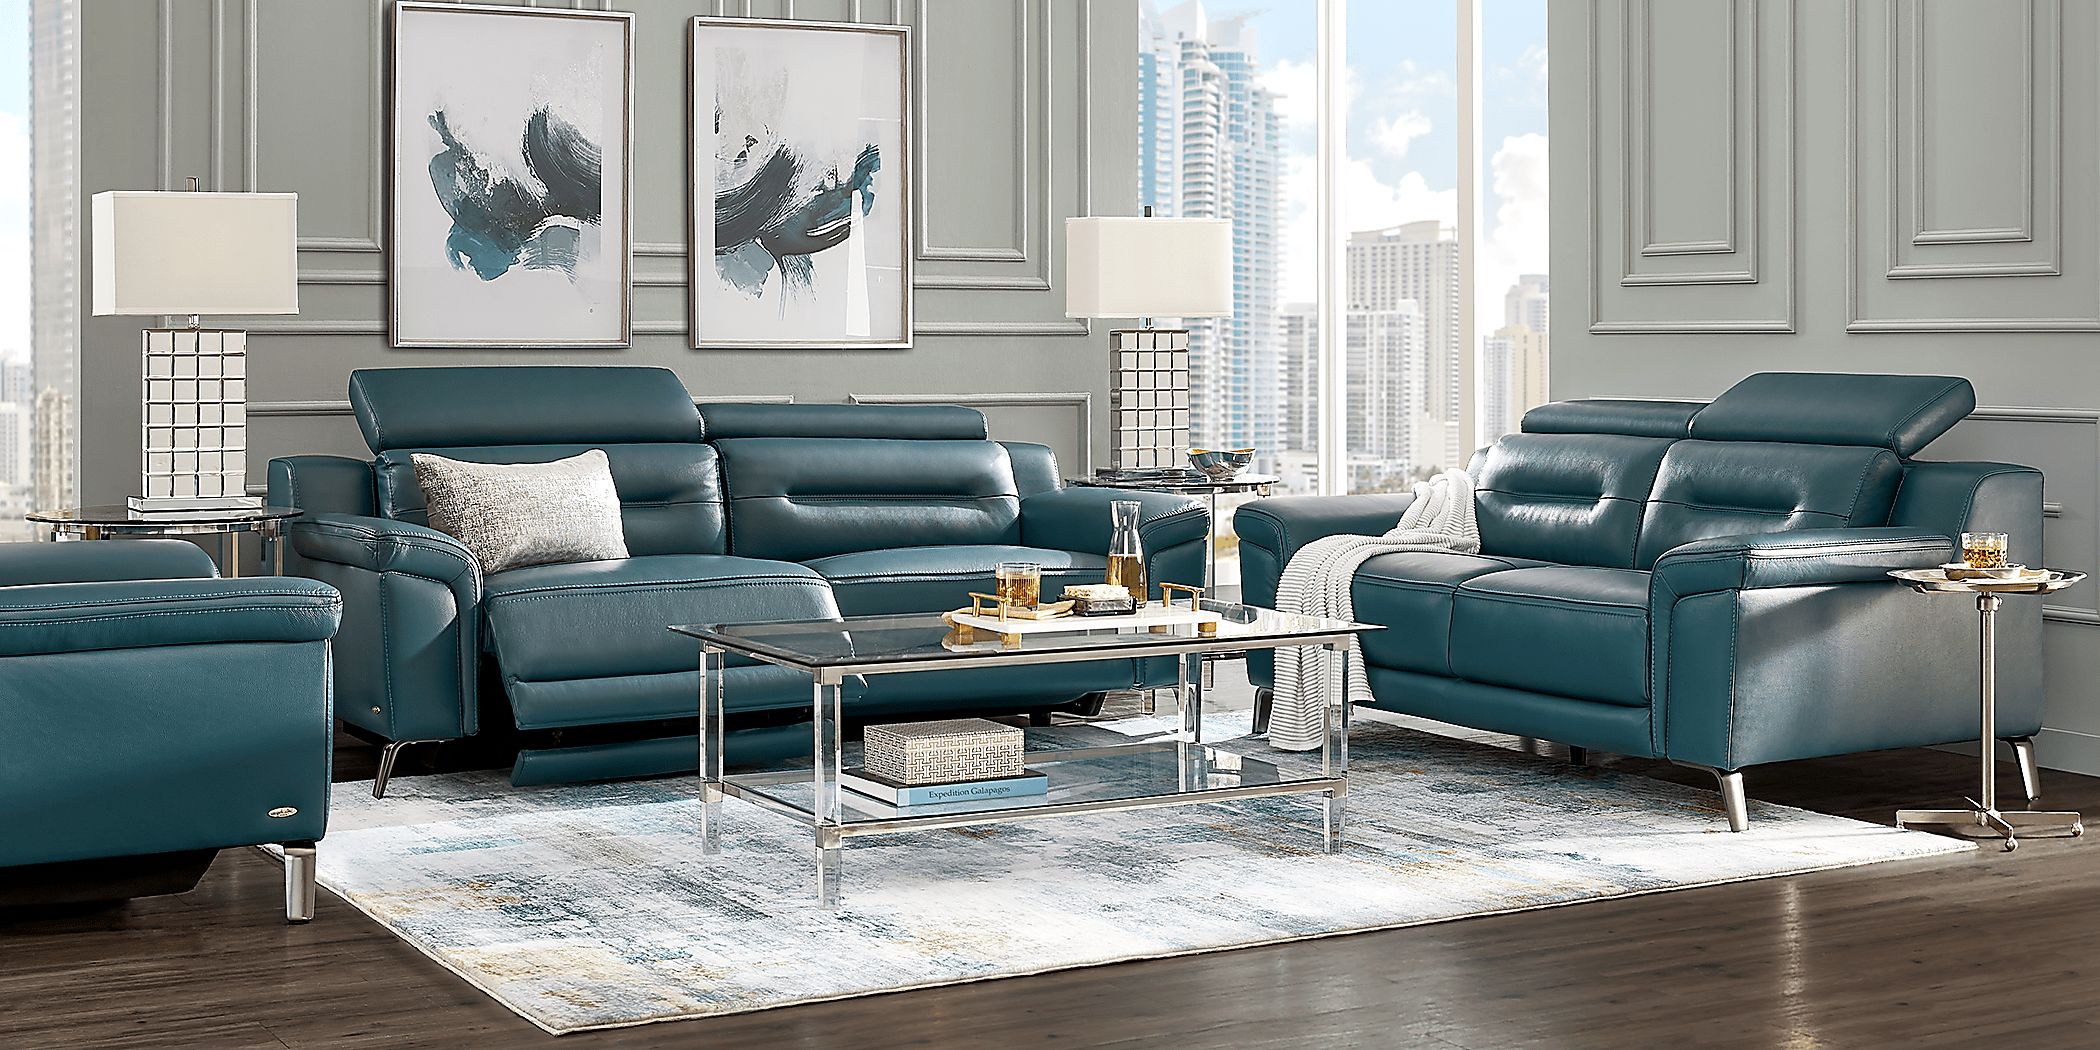 Castella Teal Leather 2 Pc Dual Power Reclining Living Room